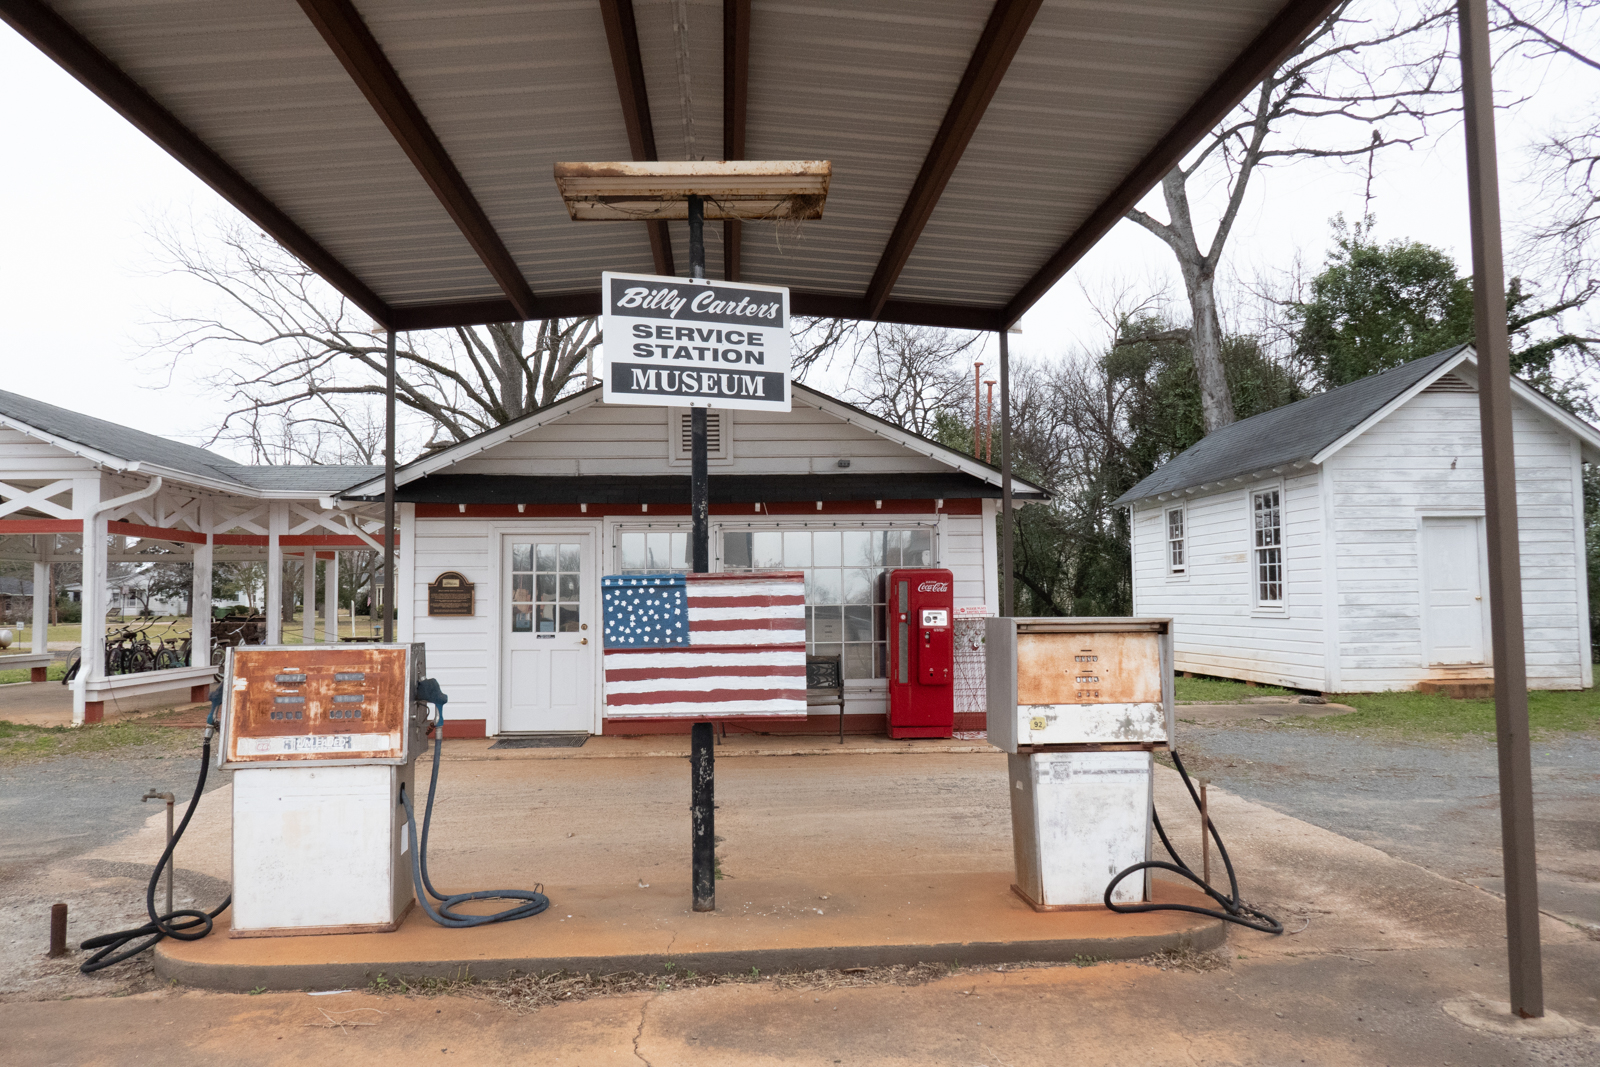 Billy Carter's gas station along the main street in the tiny town of Plains, Georgia